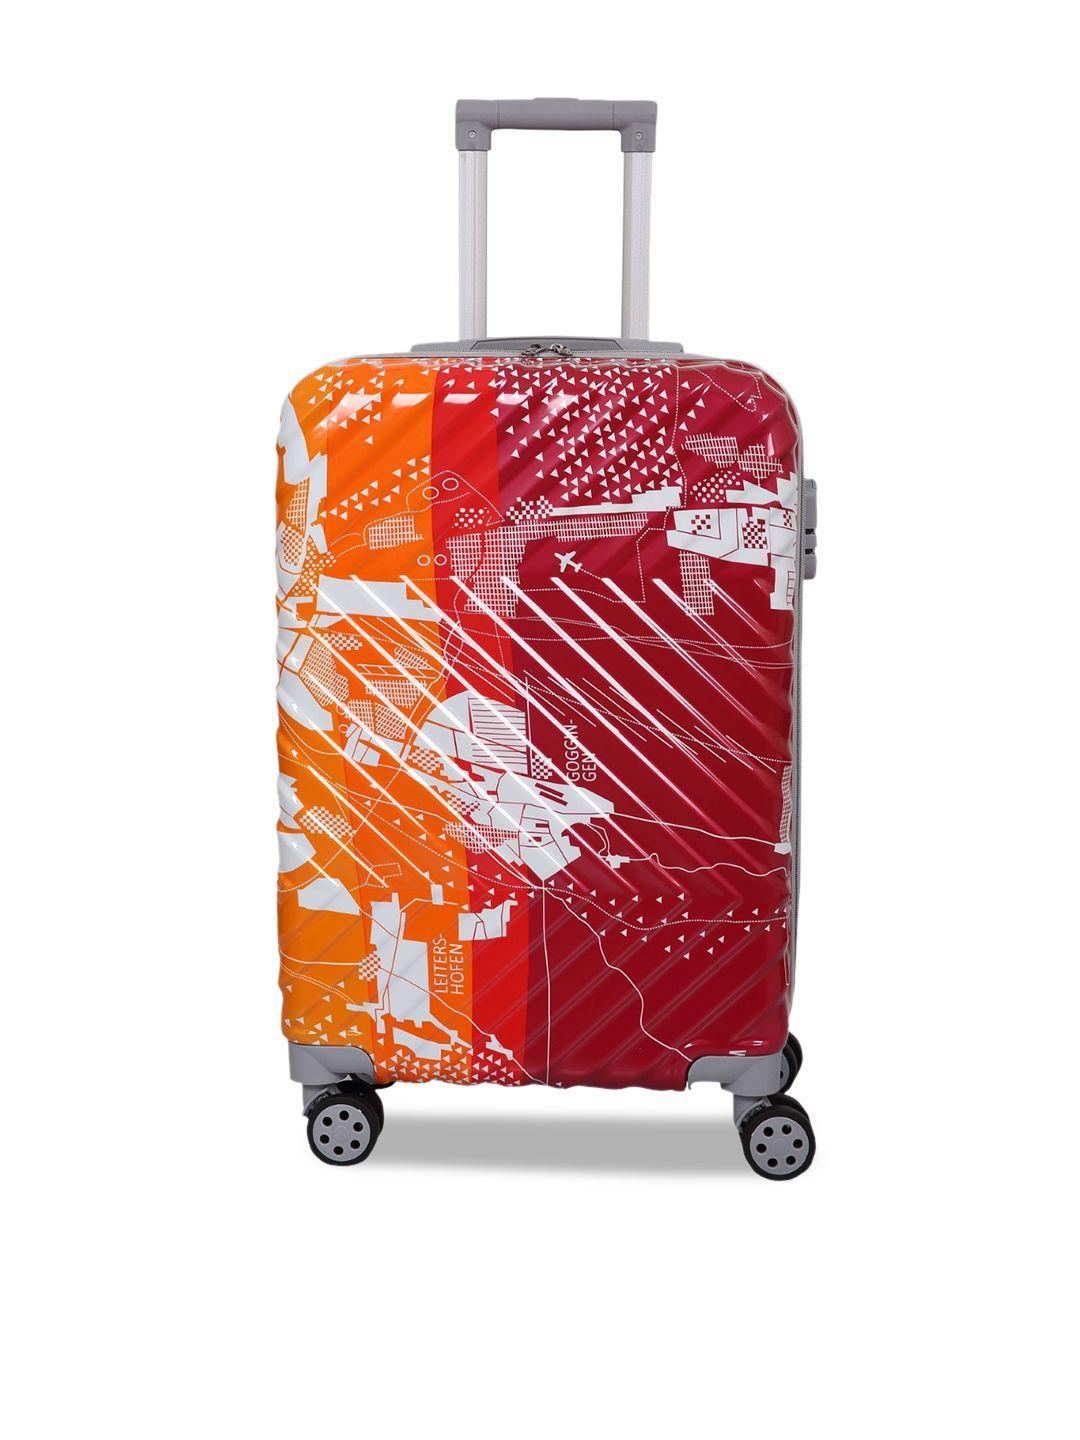 polo class red printed 24 inch trolley bag